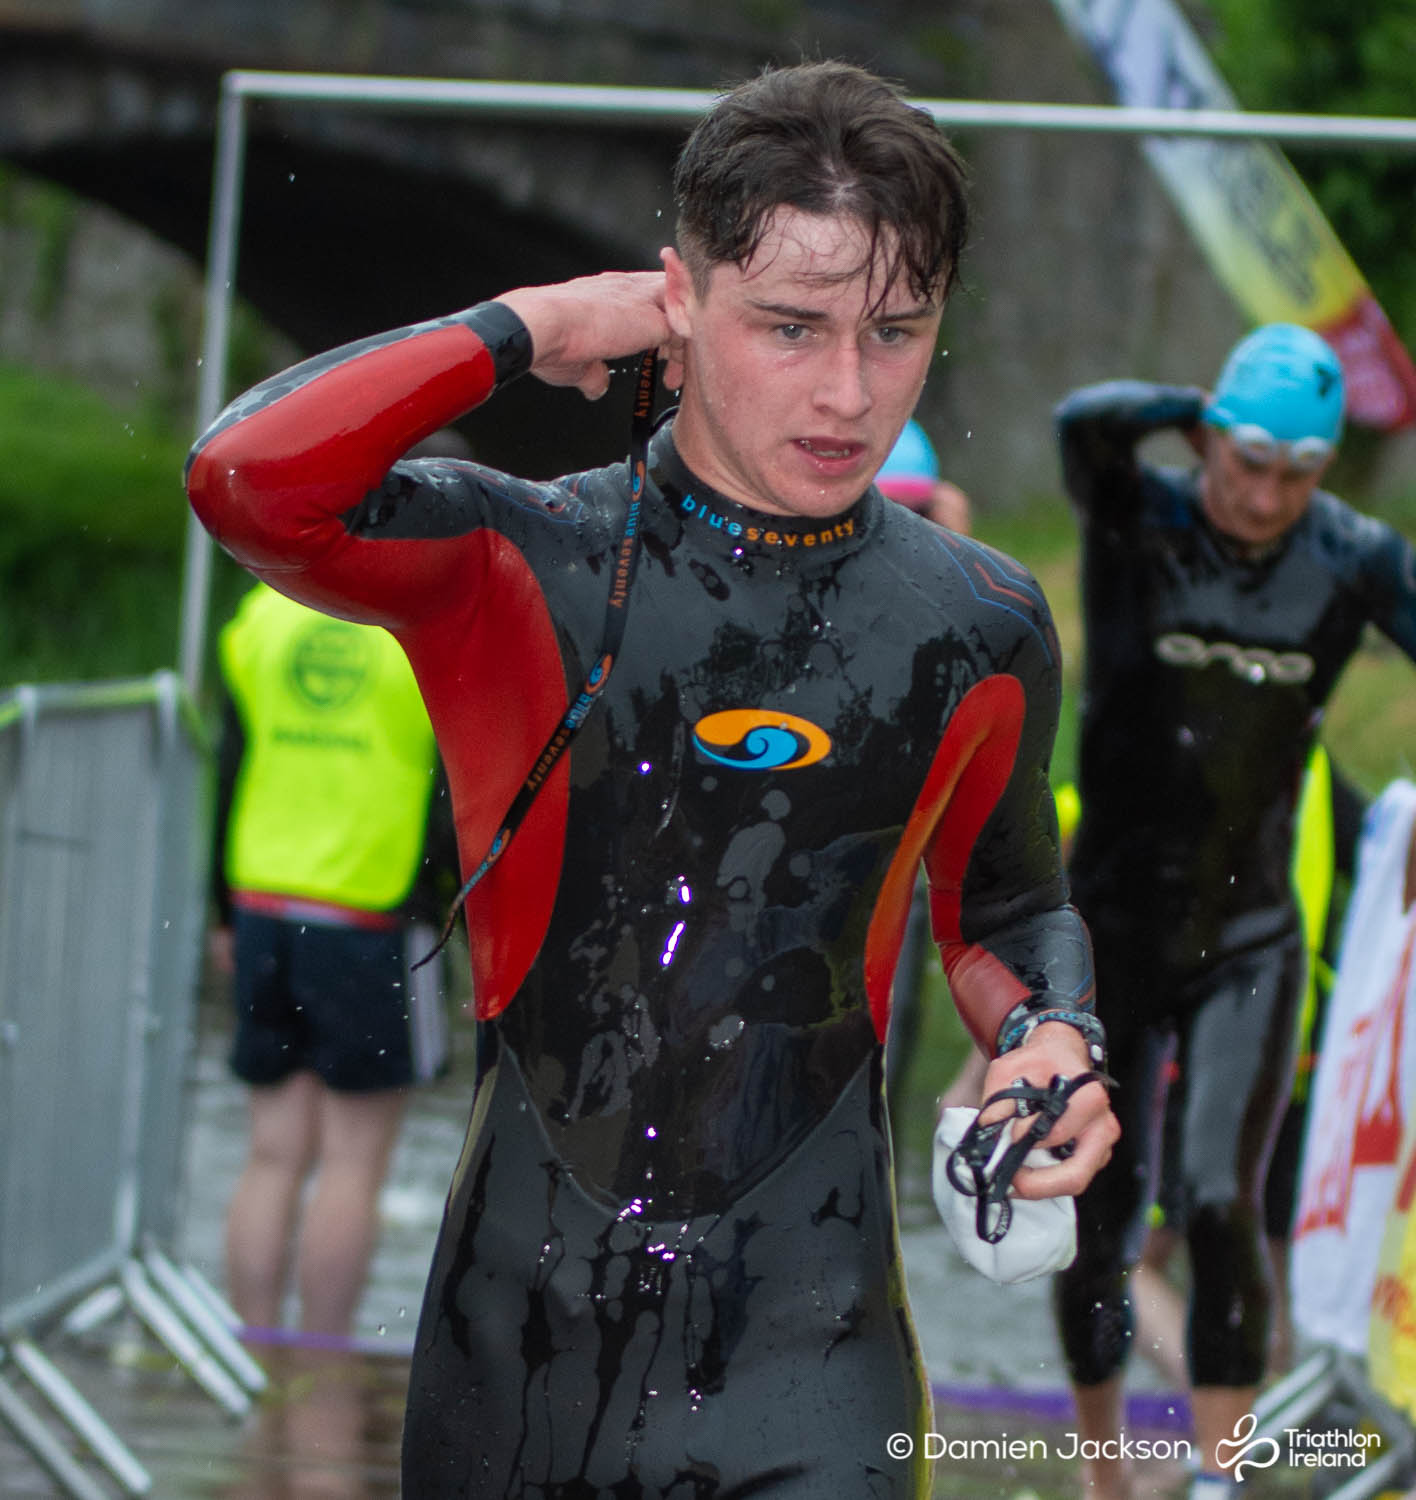 Athy_2018 (38 of 526) - TriAthy - XII Edition - 2nd June 2018